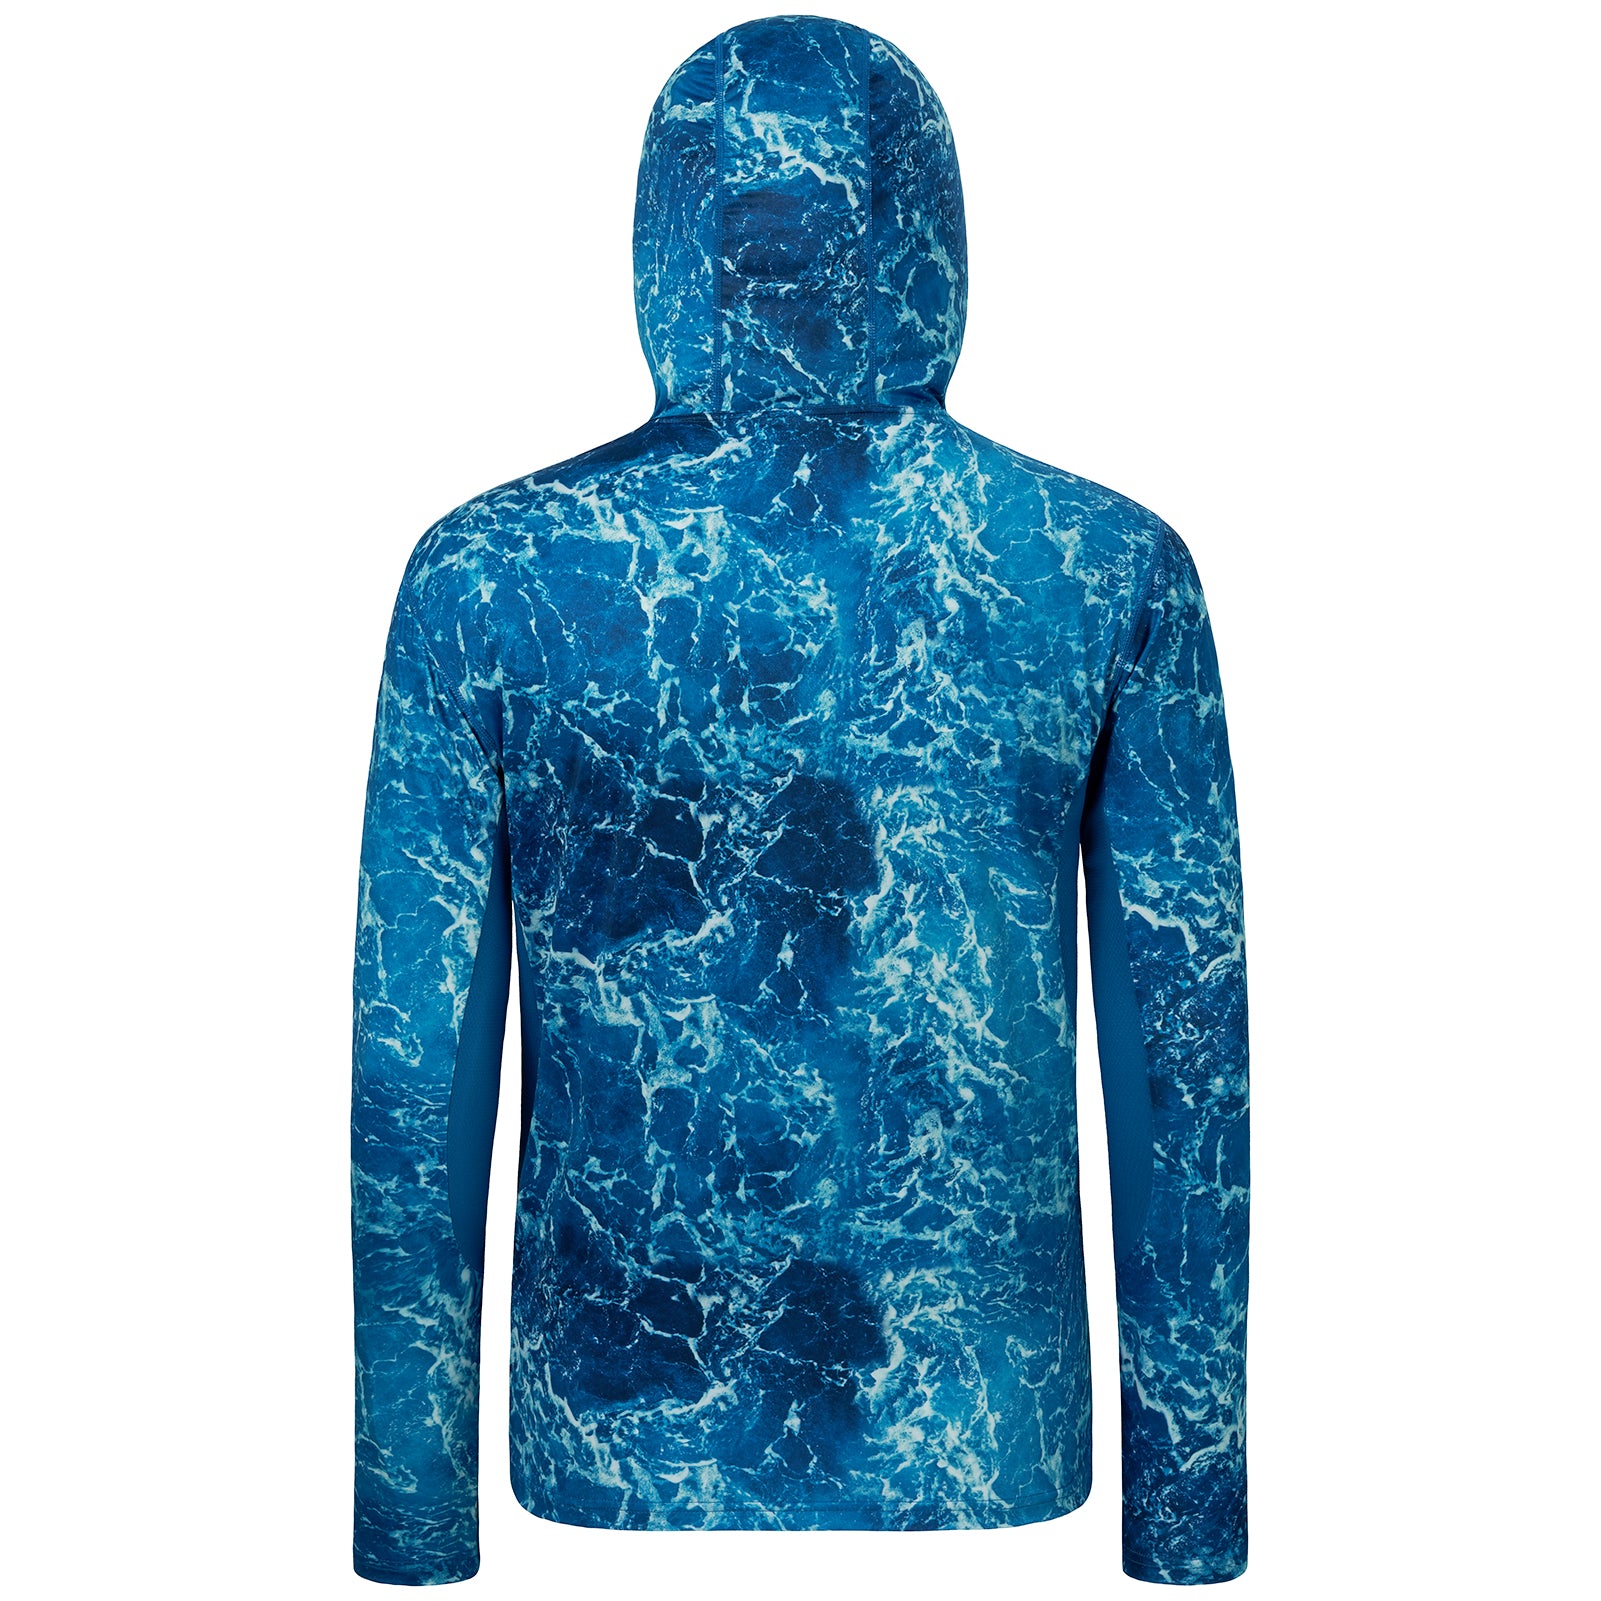 Up To 60% Off on Men's Printed Fishing Hoodies